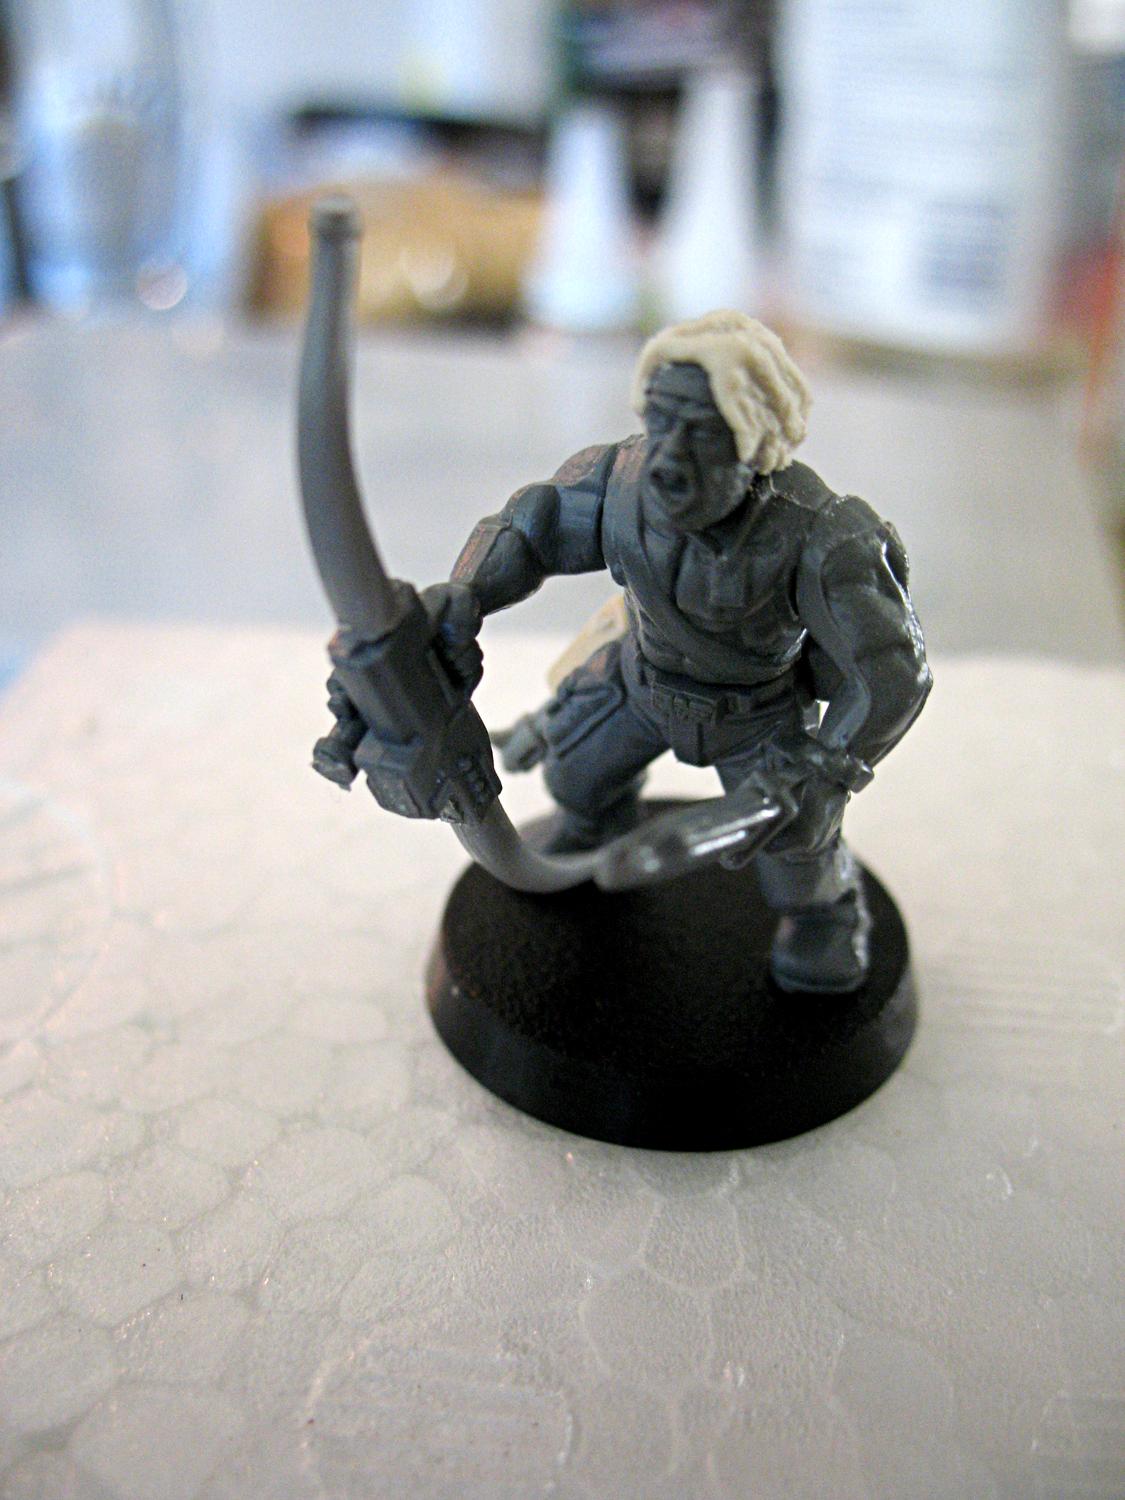 Catachans, Character, Conversion, Imperial Guard, Sly Marbo, Work In Progress